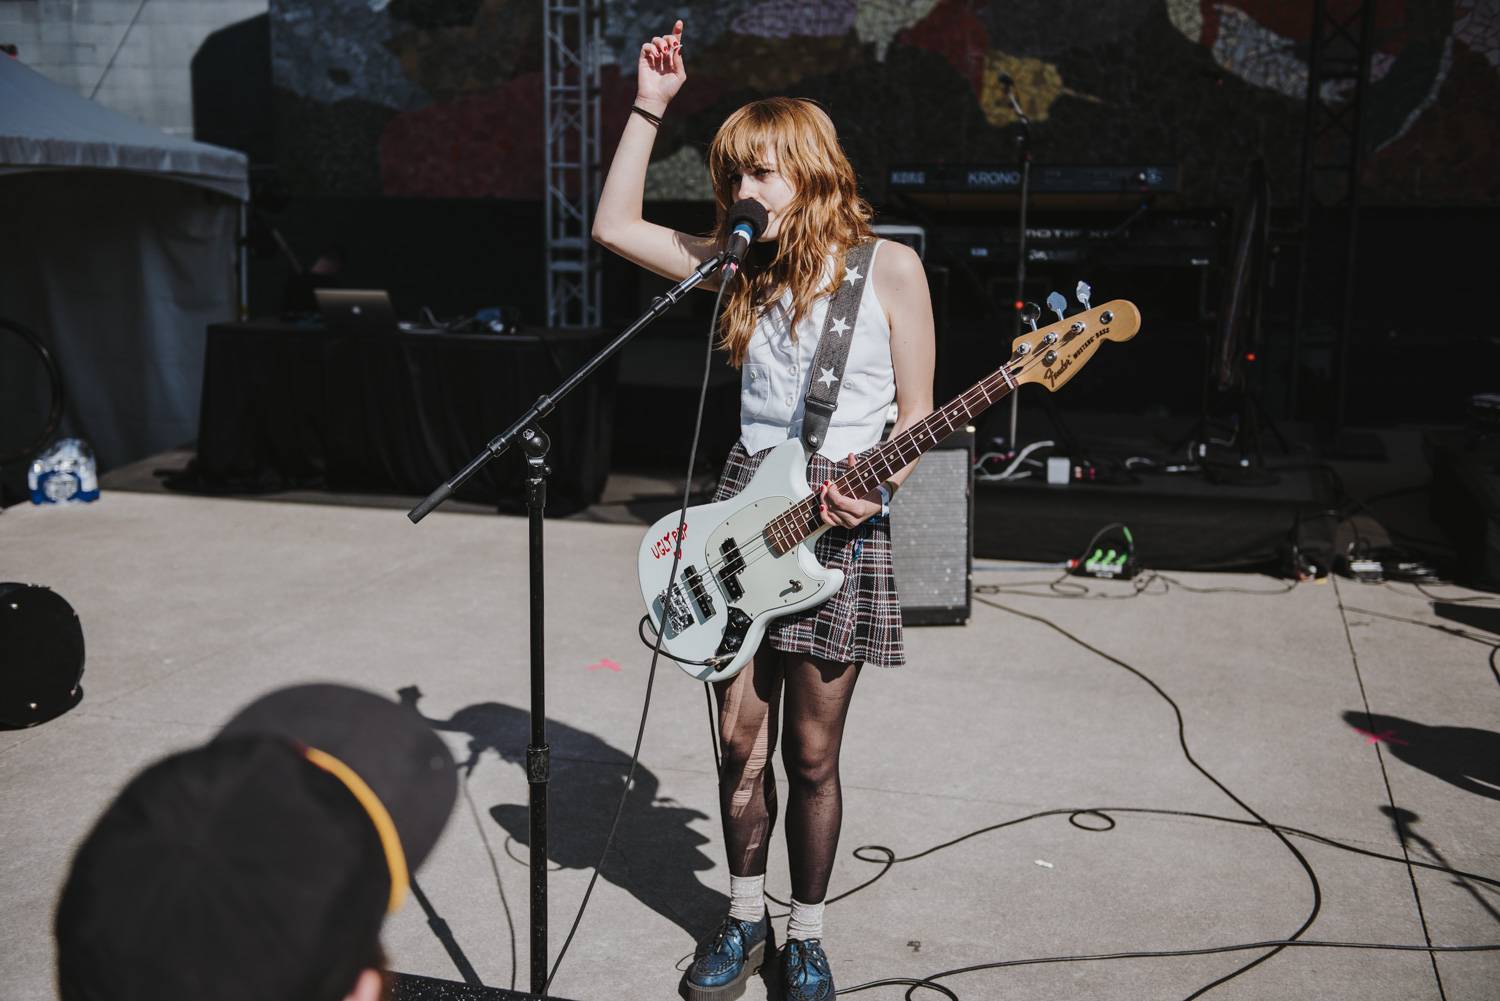 Skating Polly at the Bumbershoot Music Festival 2018 - Day 2. Sept 1 2018. Pavel Boiko photo.